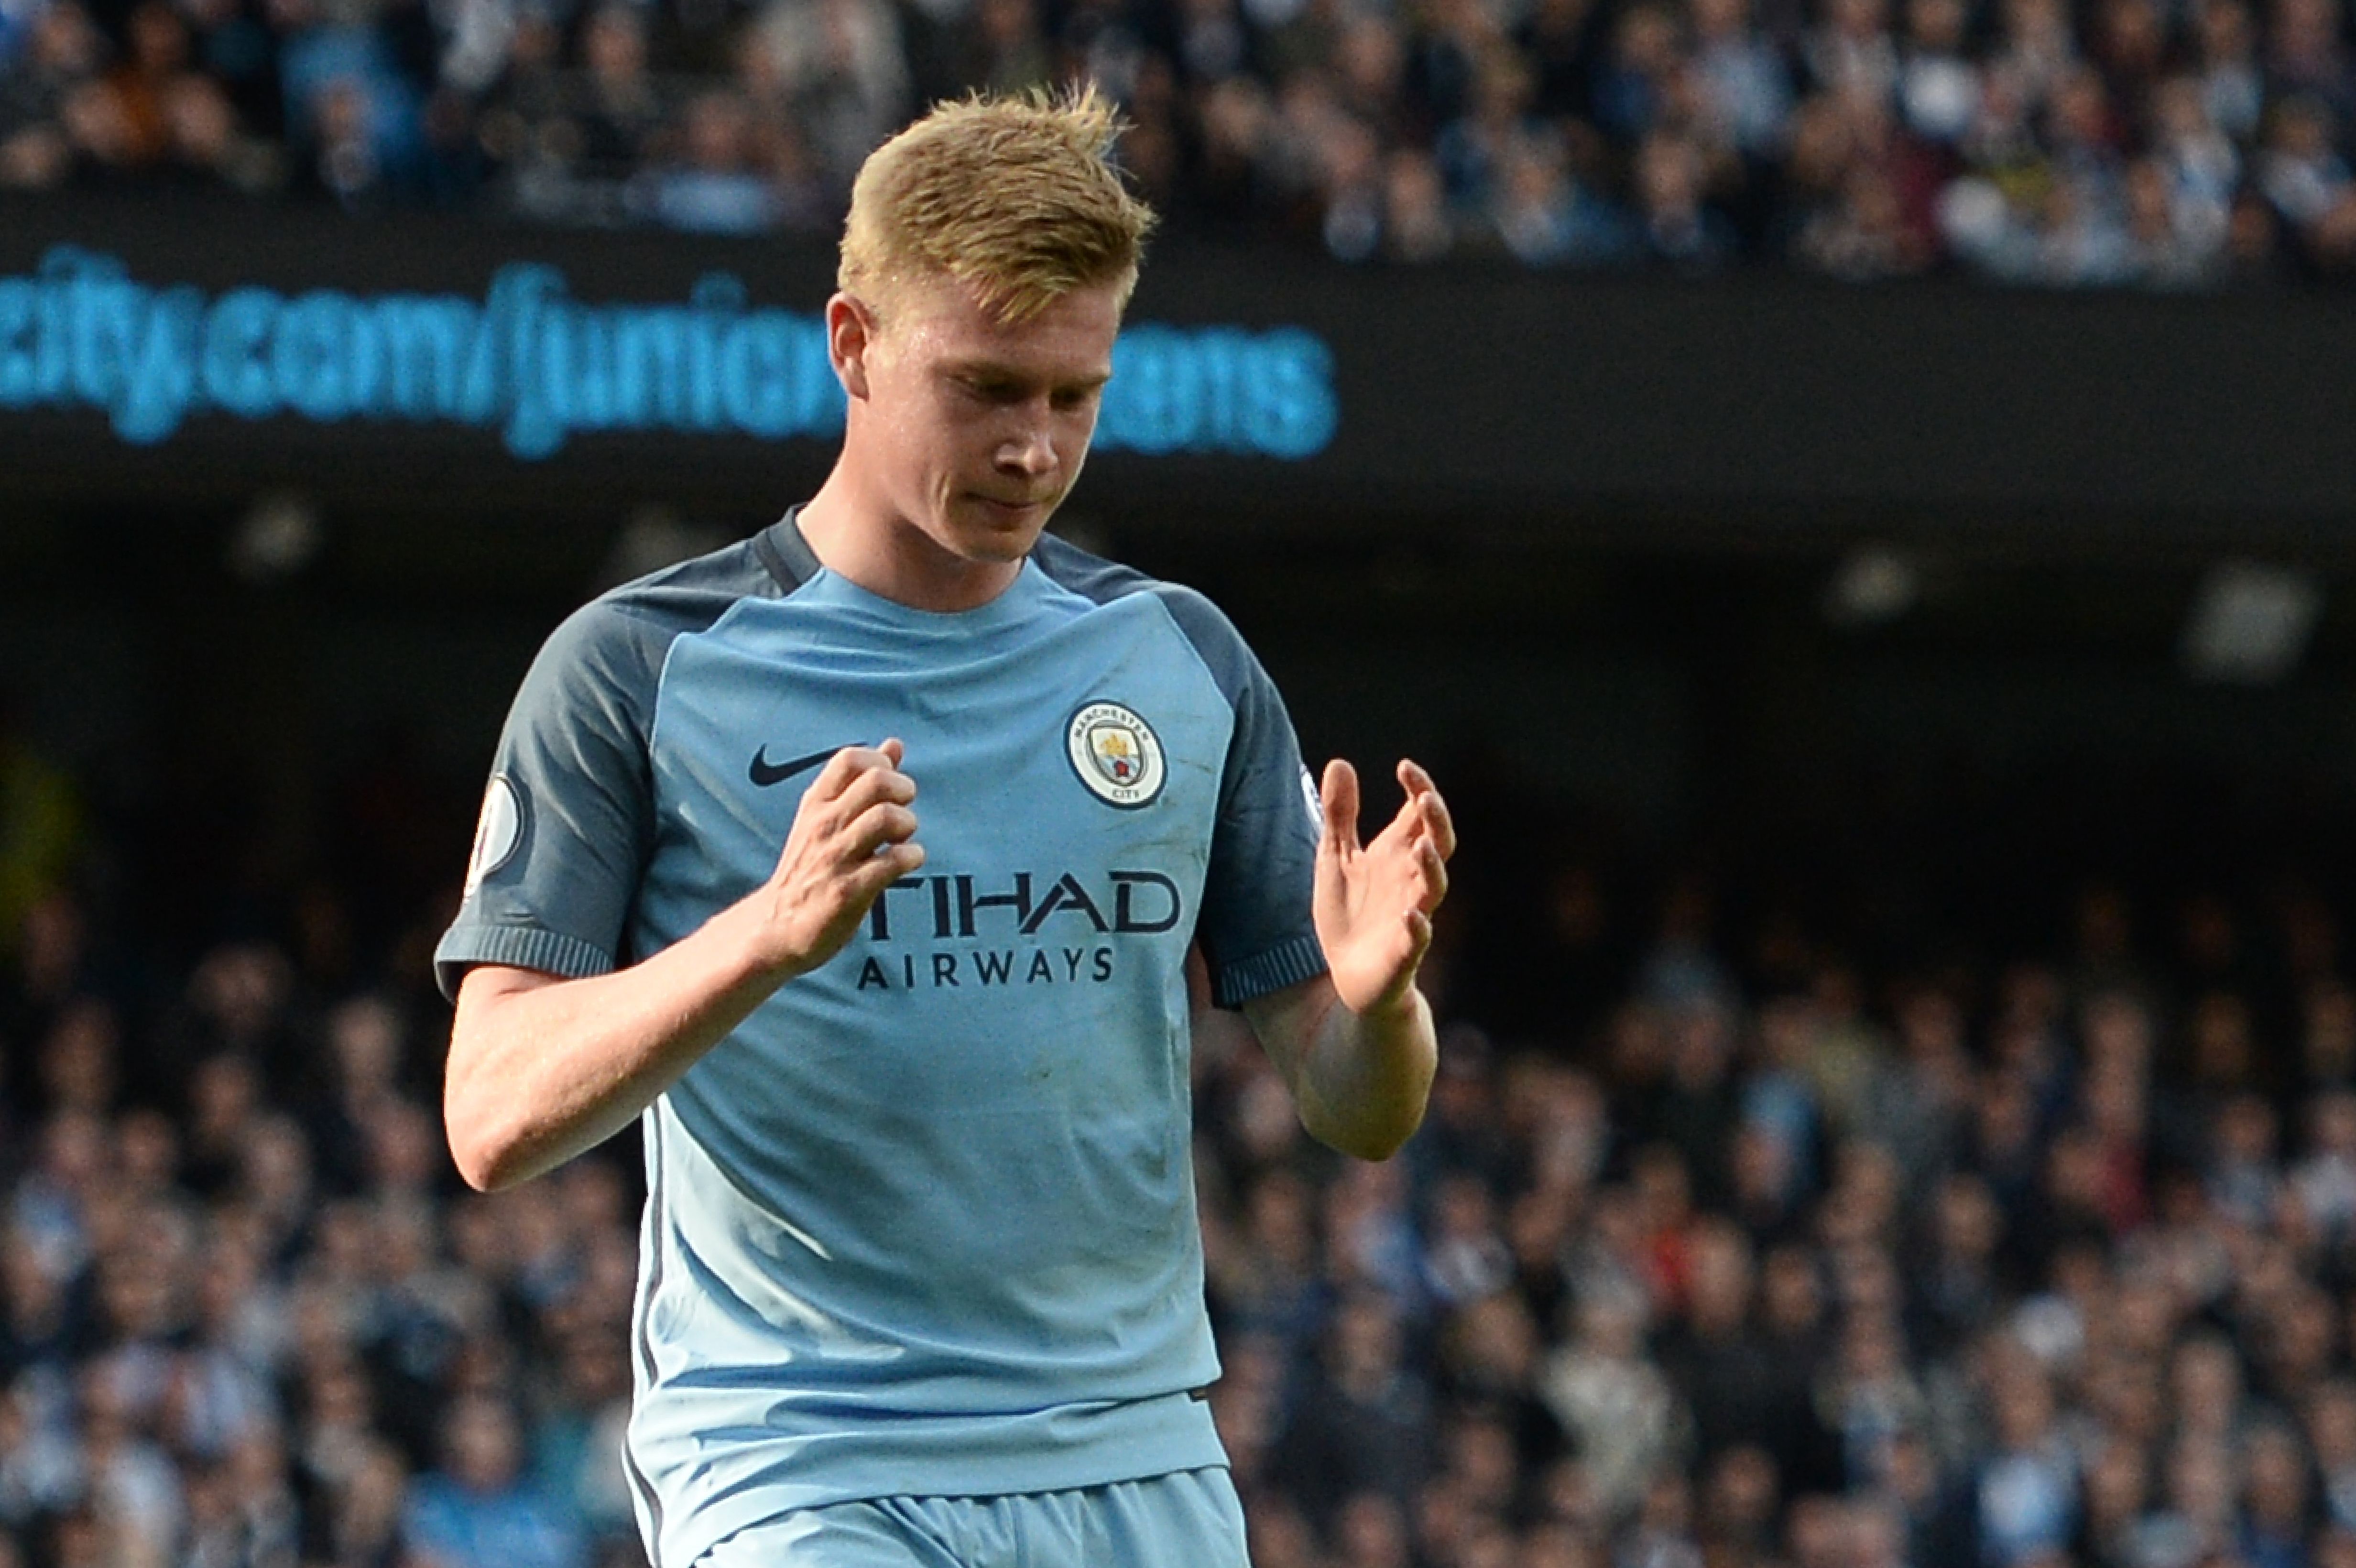 Manchester City's Belgian midfielder Kevin De Bruyne reacts after missing a penalty during the English Premier League football match between Manchester City and Everton at the Etihad Stadium in Manchester, north west England, on October 15, 2016. / AFP / OLI SCARFF / RESTRICTED TO EDITORIAL USE. No use with unauthorized audio, video, data, fixture lists, club/league logos or 'live' services. Online in-match use limited to 75 images, no video emulation. No use in betting, games or single club/league/player publications.  /         (Photo credit should read OLI SCARFF/AFP/Getty Images)